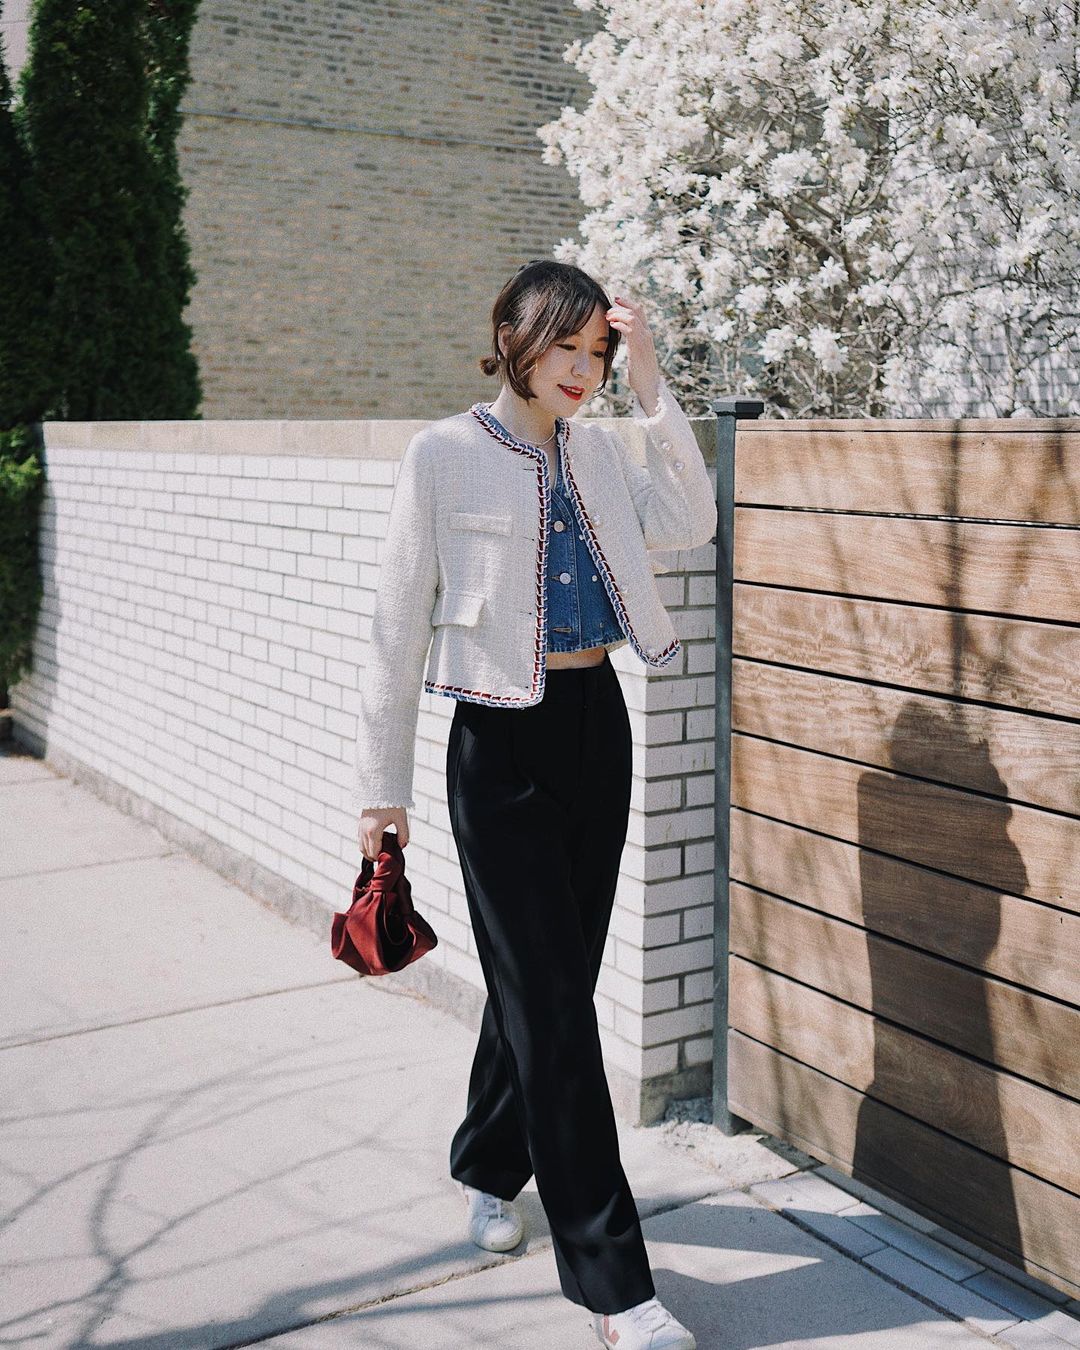 6 ways to wear youthful and chic fabric pants for the office girl - 15